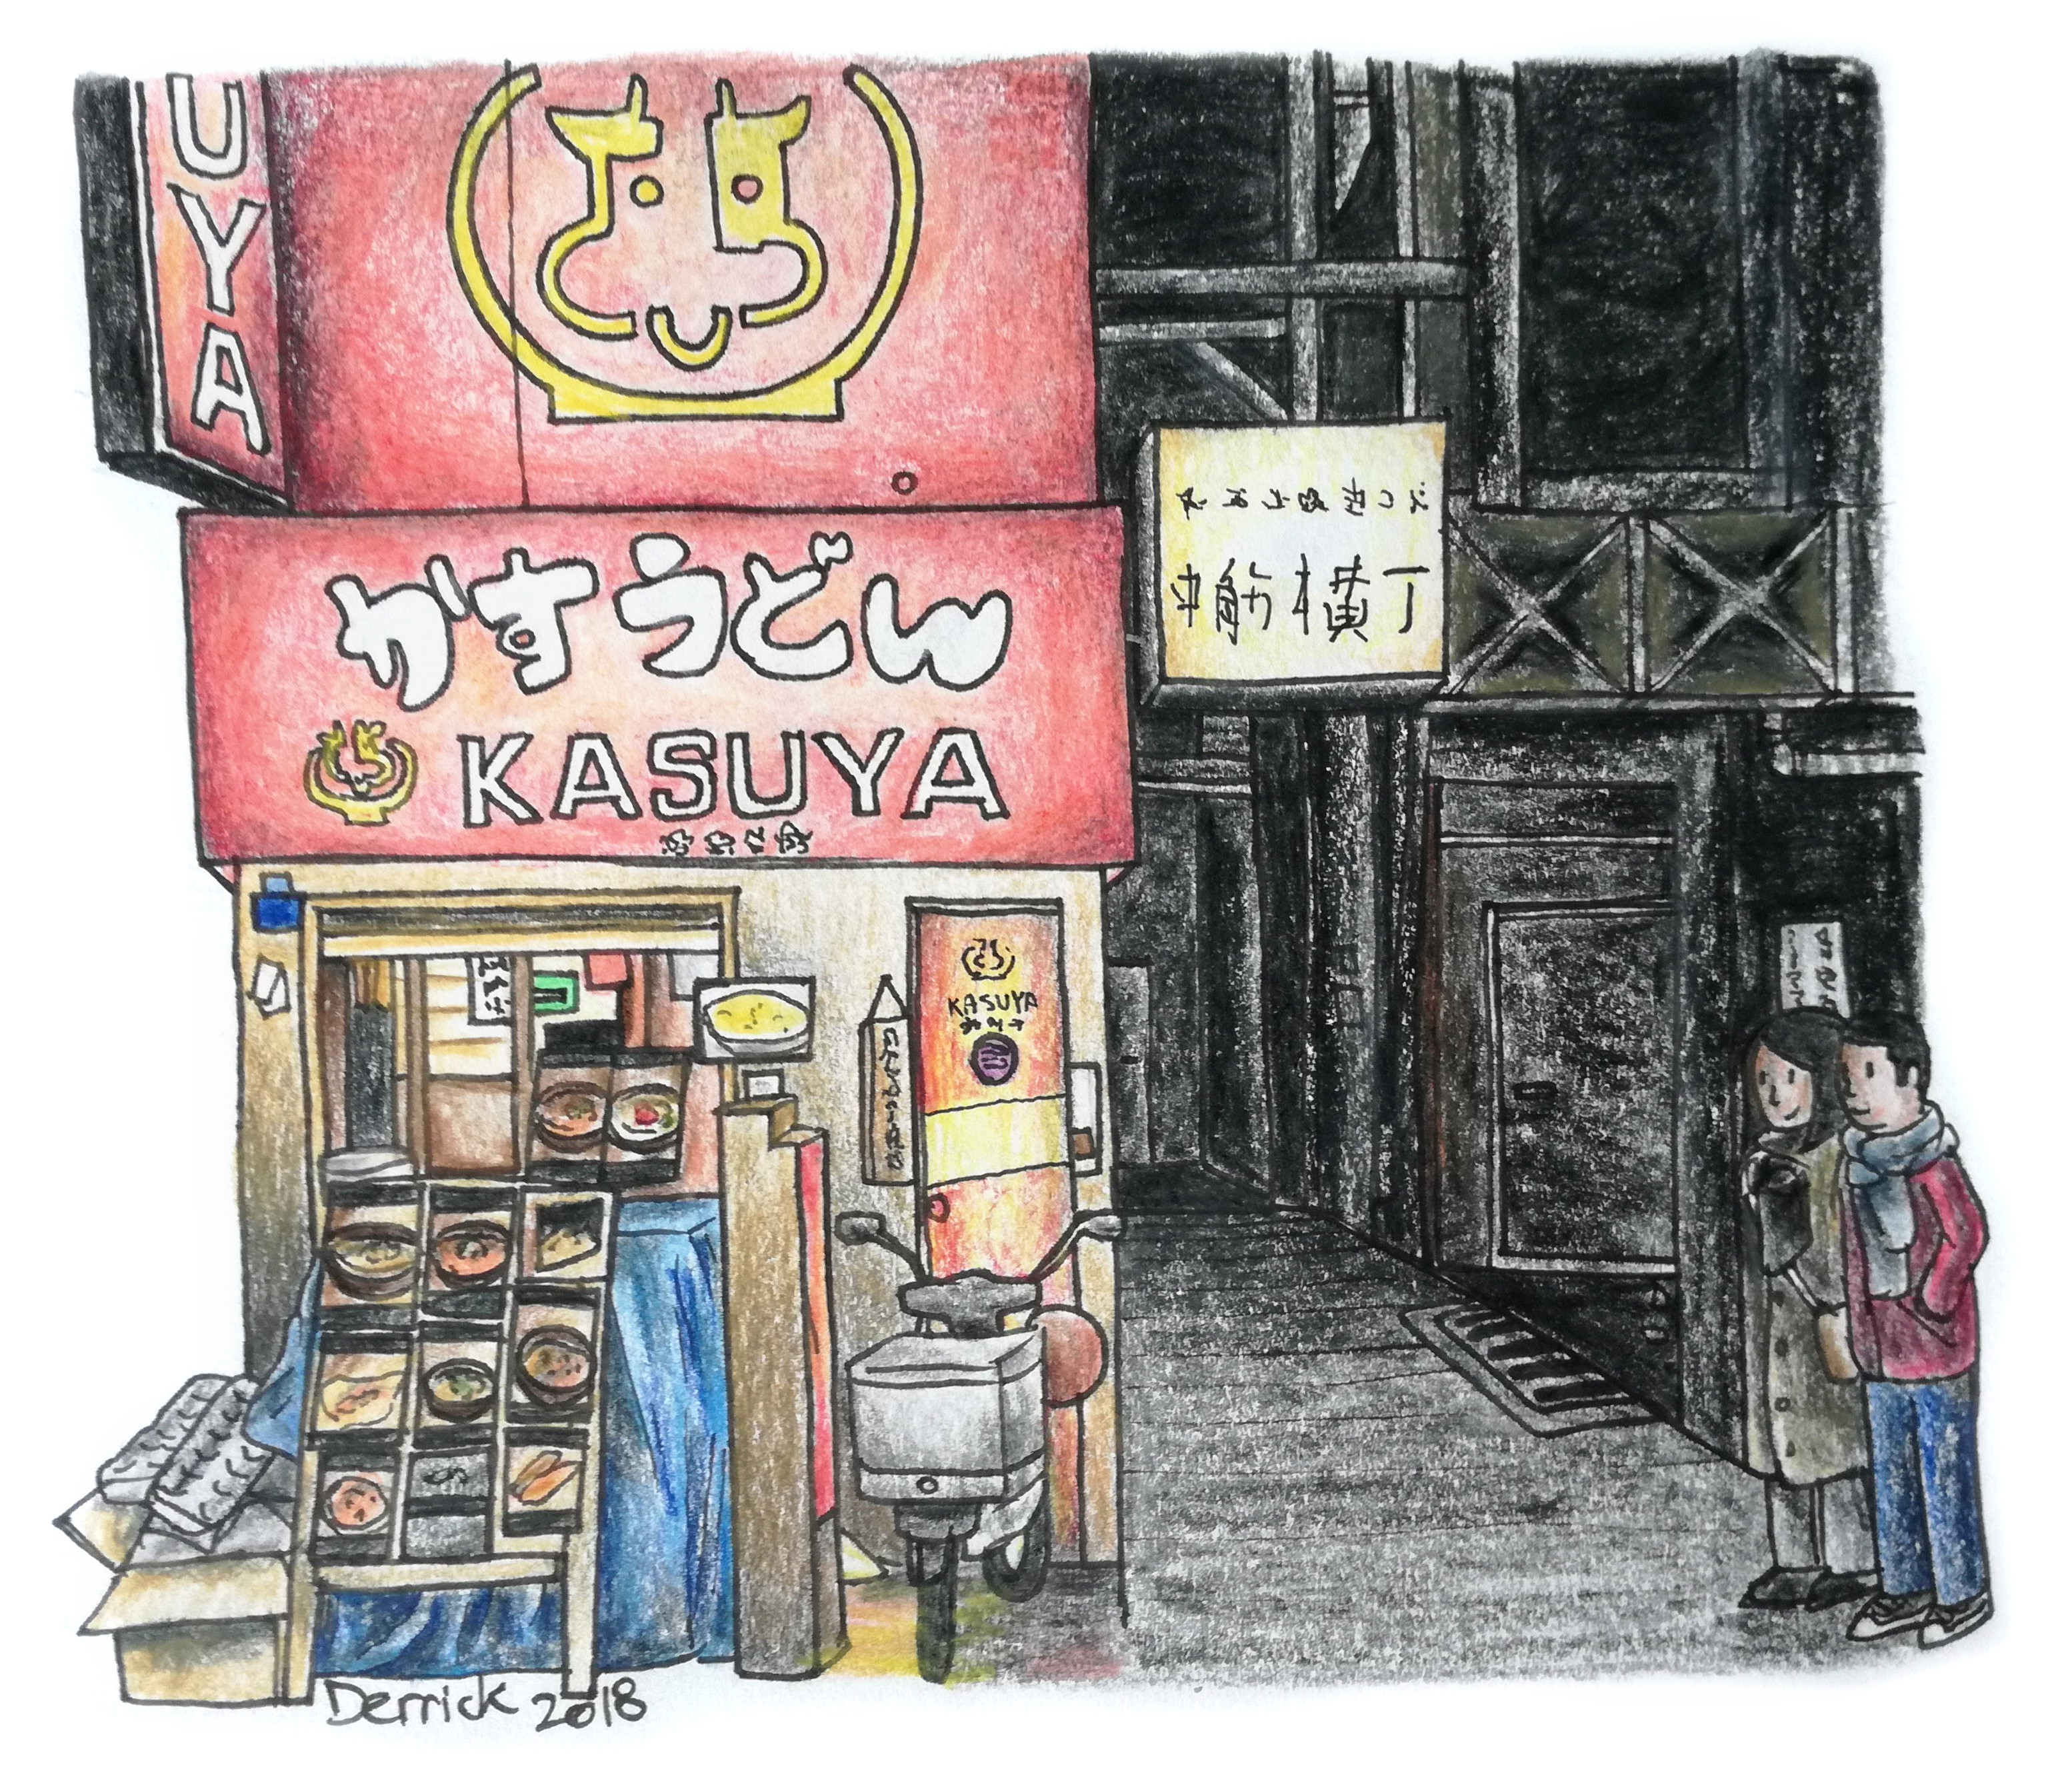 Drawing of a Japanese restaurant Kasuya next to an alleyway in Osaka